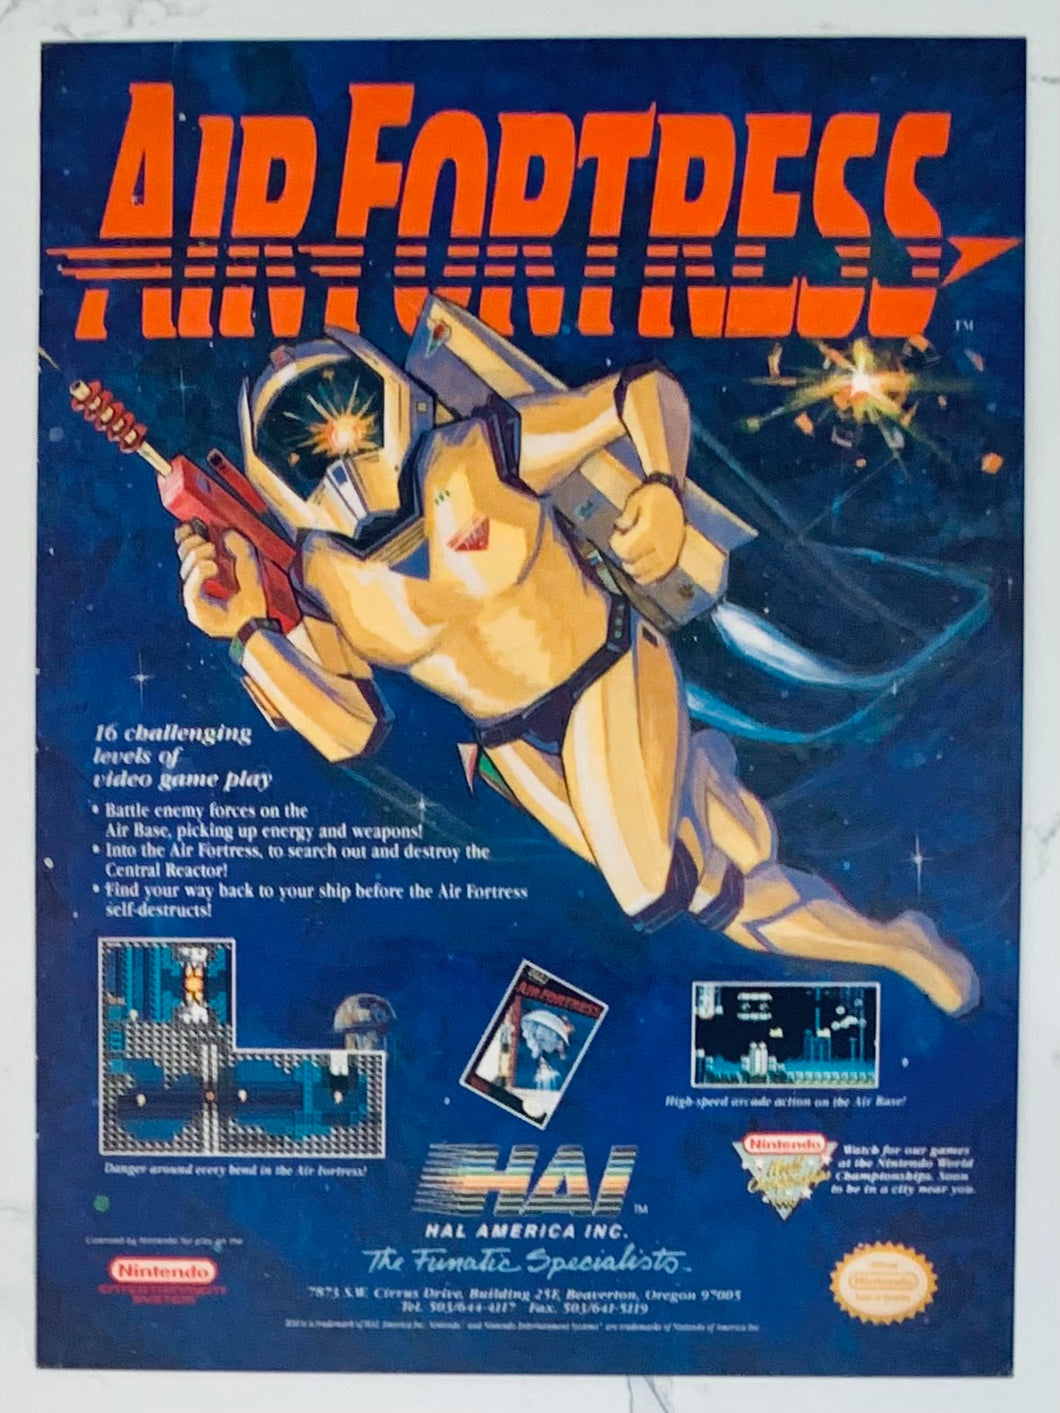 Air Fortress - NES - Original Vintage Advertisement - Print Ads - Laminated A4 Poster